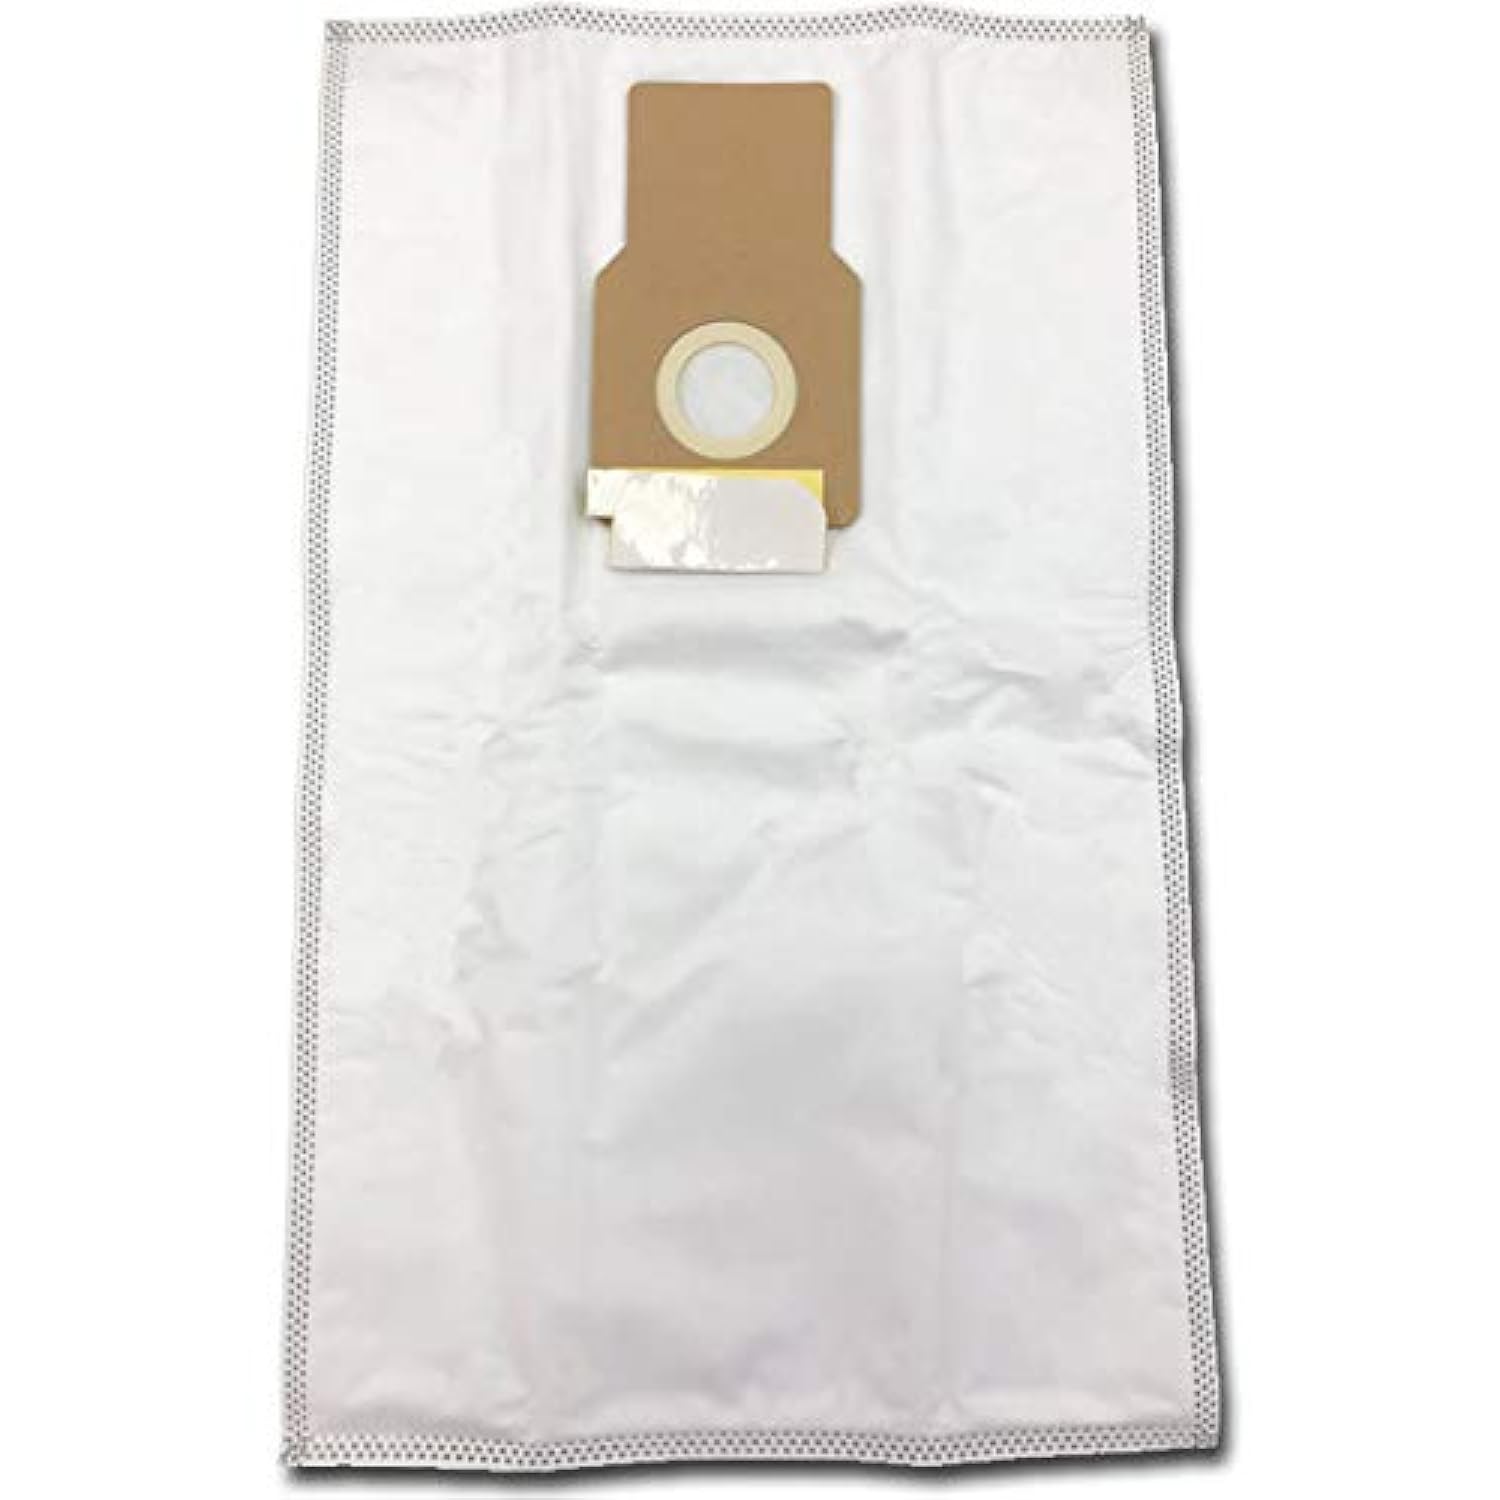 EnviroCare Replacement Allergen Vacuum Bags designed to fit Kenmore 50688 and 50690 Type U, L, and O, Panasonic Type U-2…